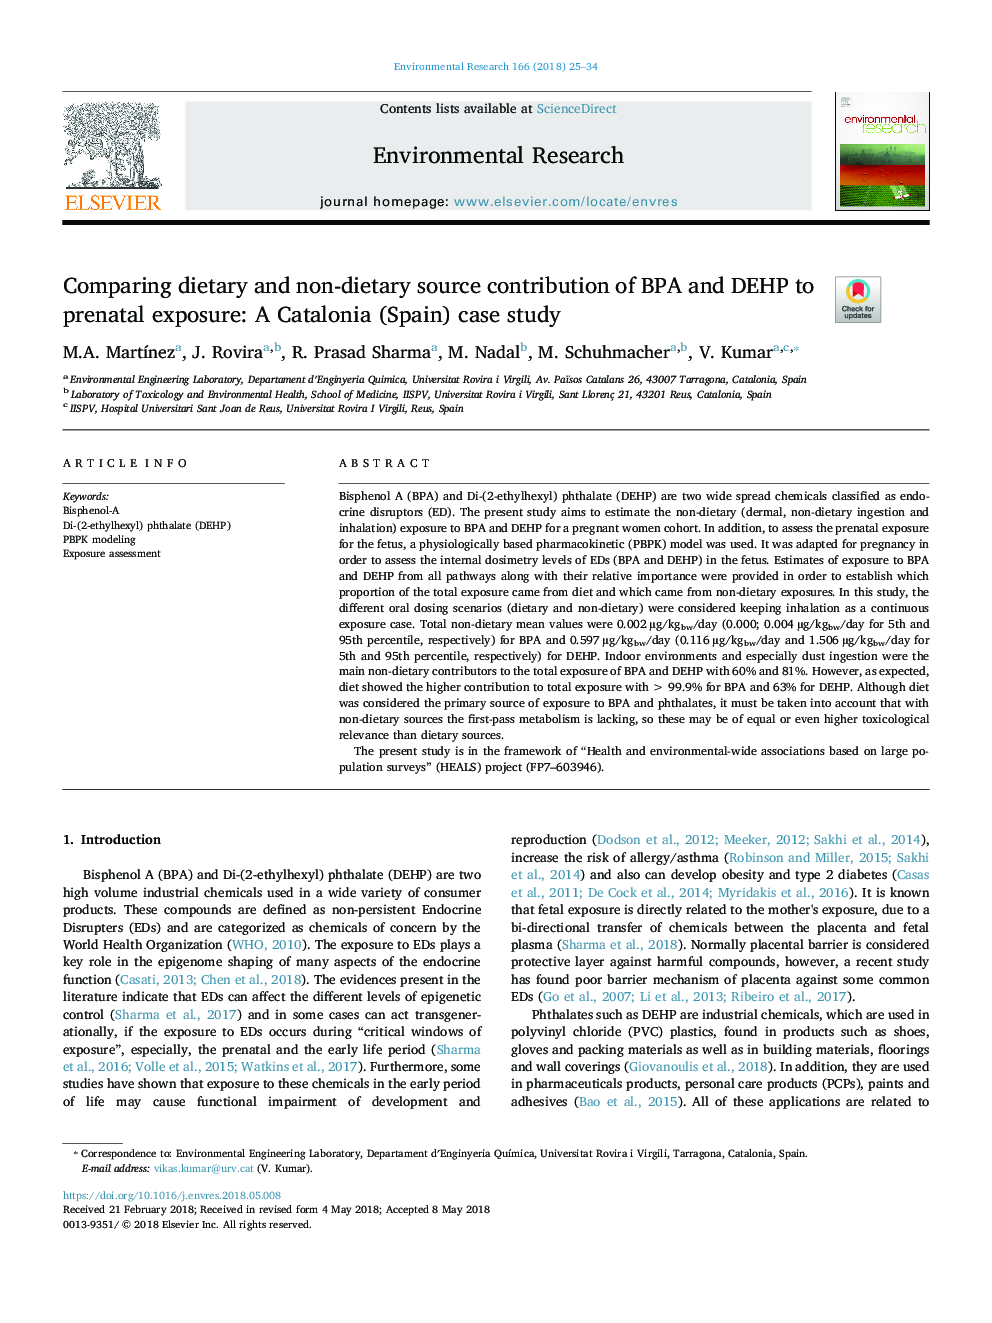 Comparing dietary and non-dietary source contribution of BPA and DEHP to prenatal exposure: A Catalonia (Spain) case study